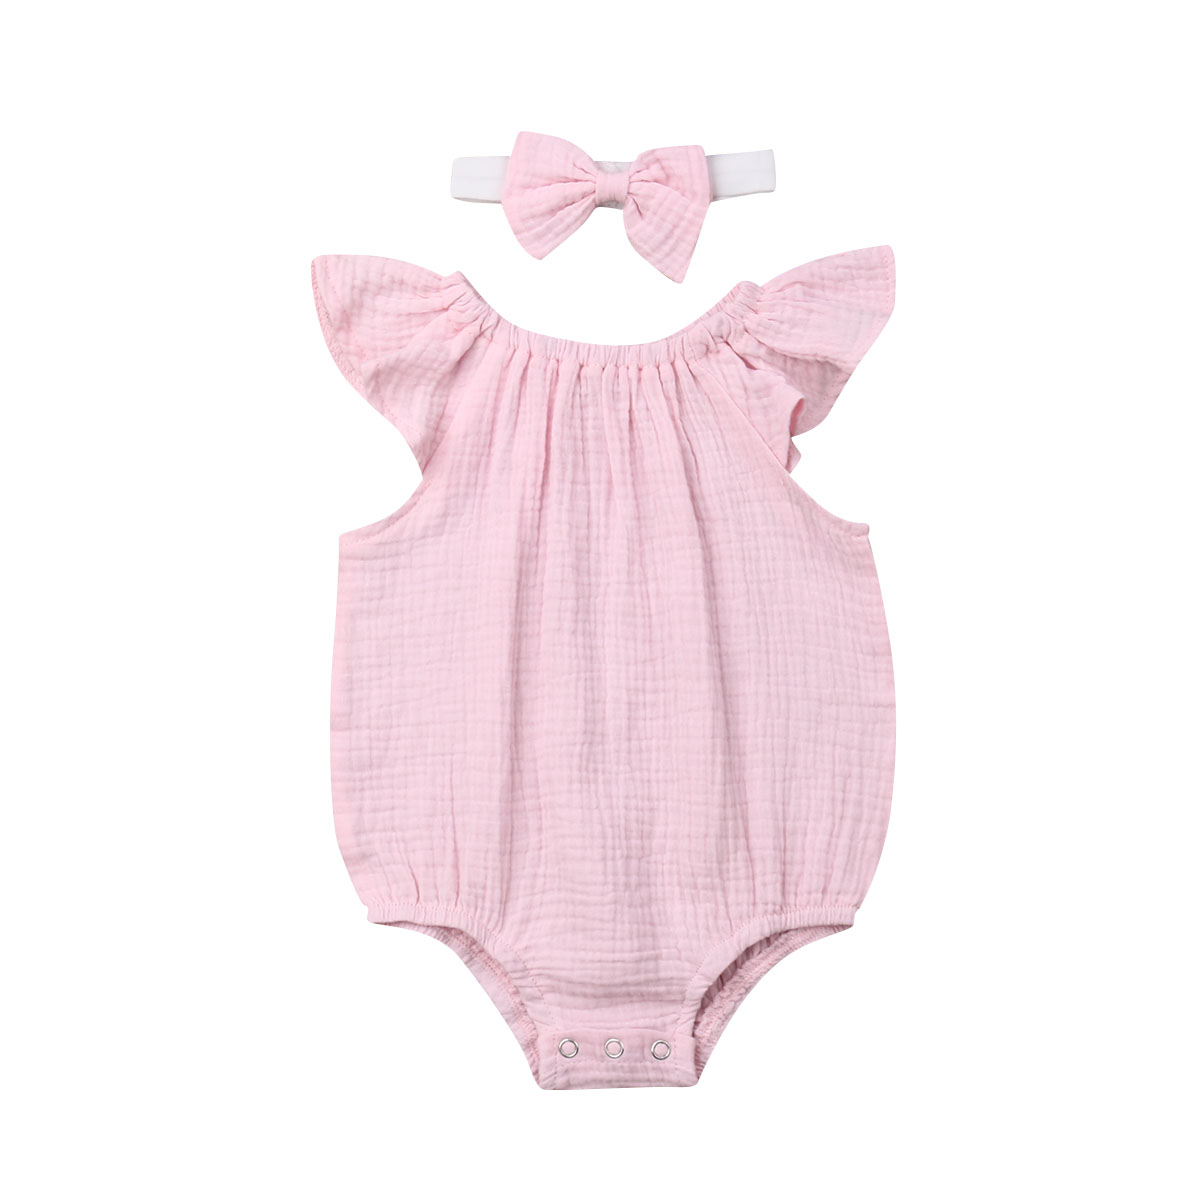 Summer Newborn Baby Girls Boys ruffled Romper Jumpsuit with headband Outfits Clothes Sunsuit 2pcs: 2 / 6M